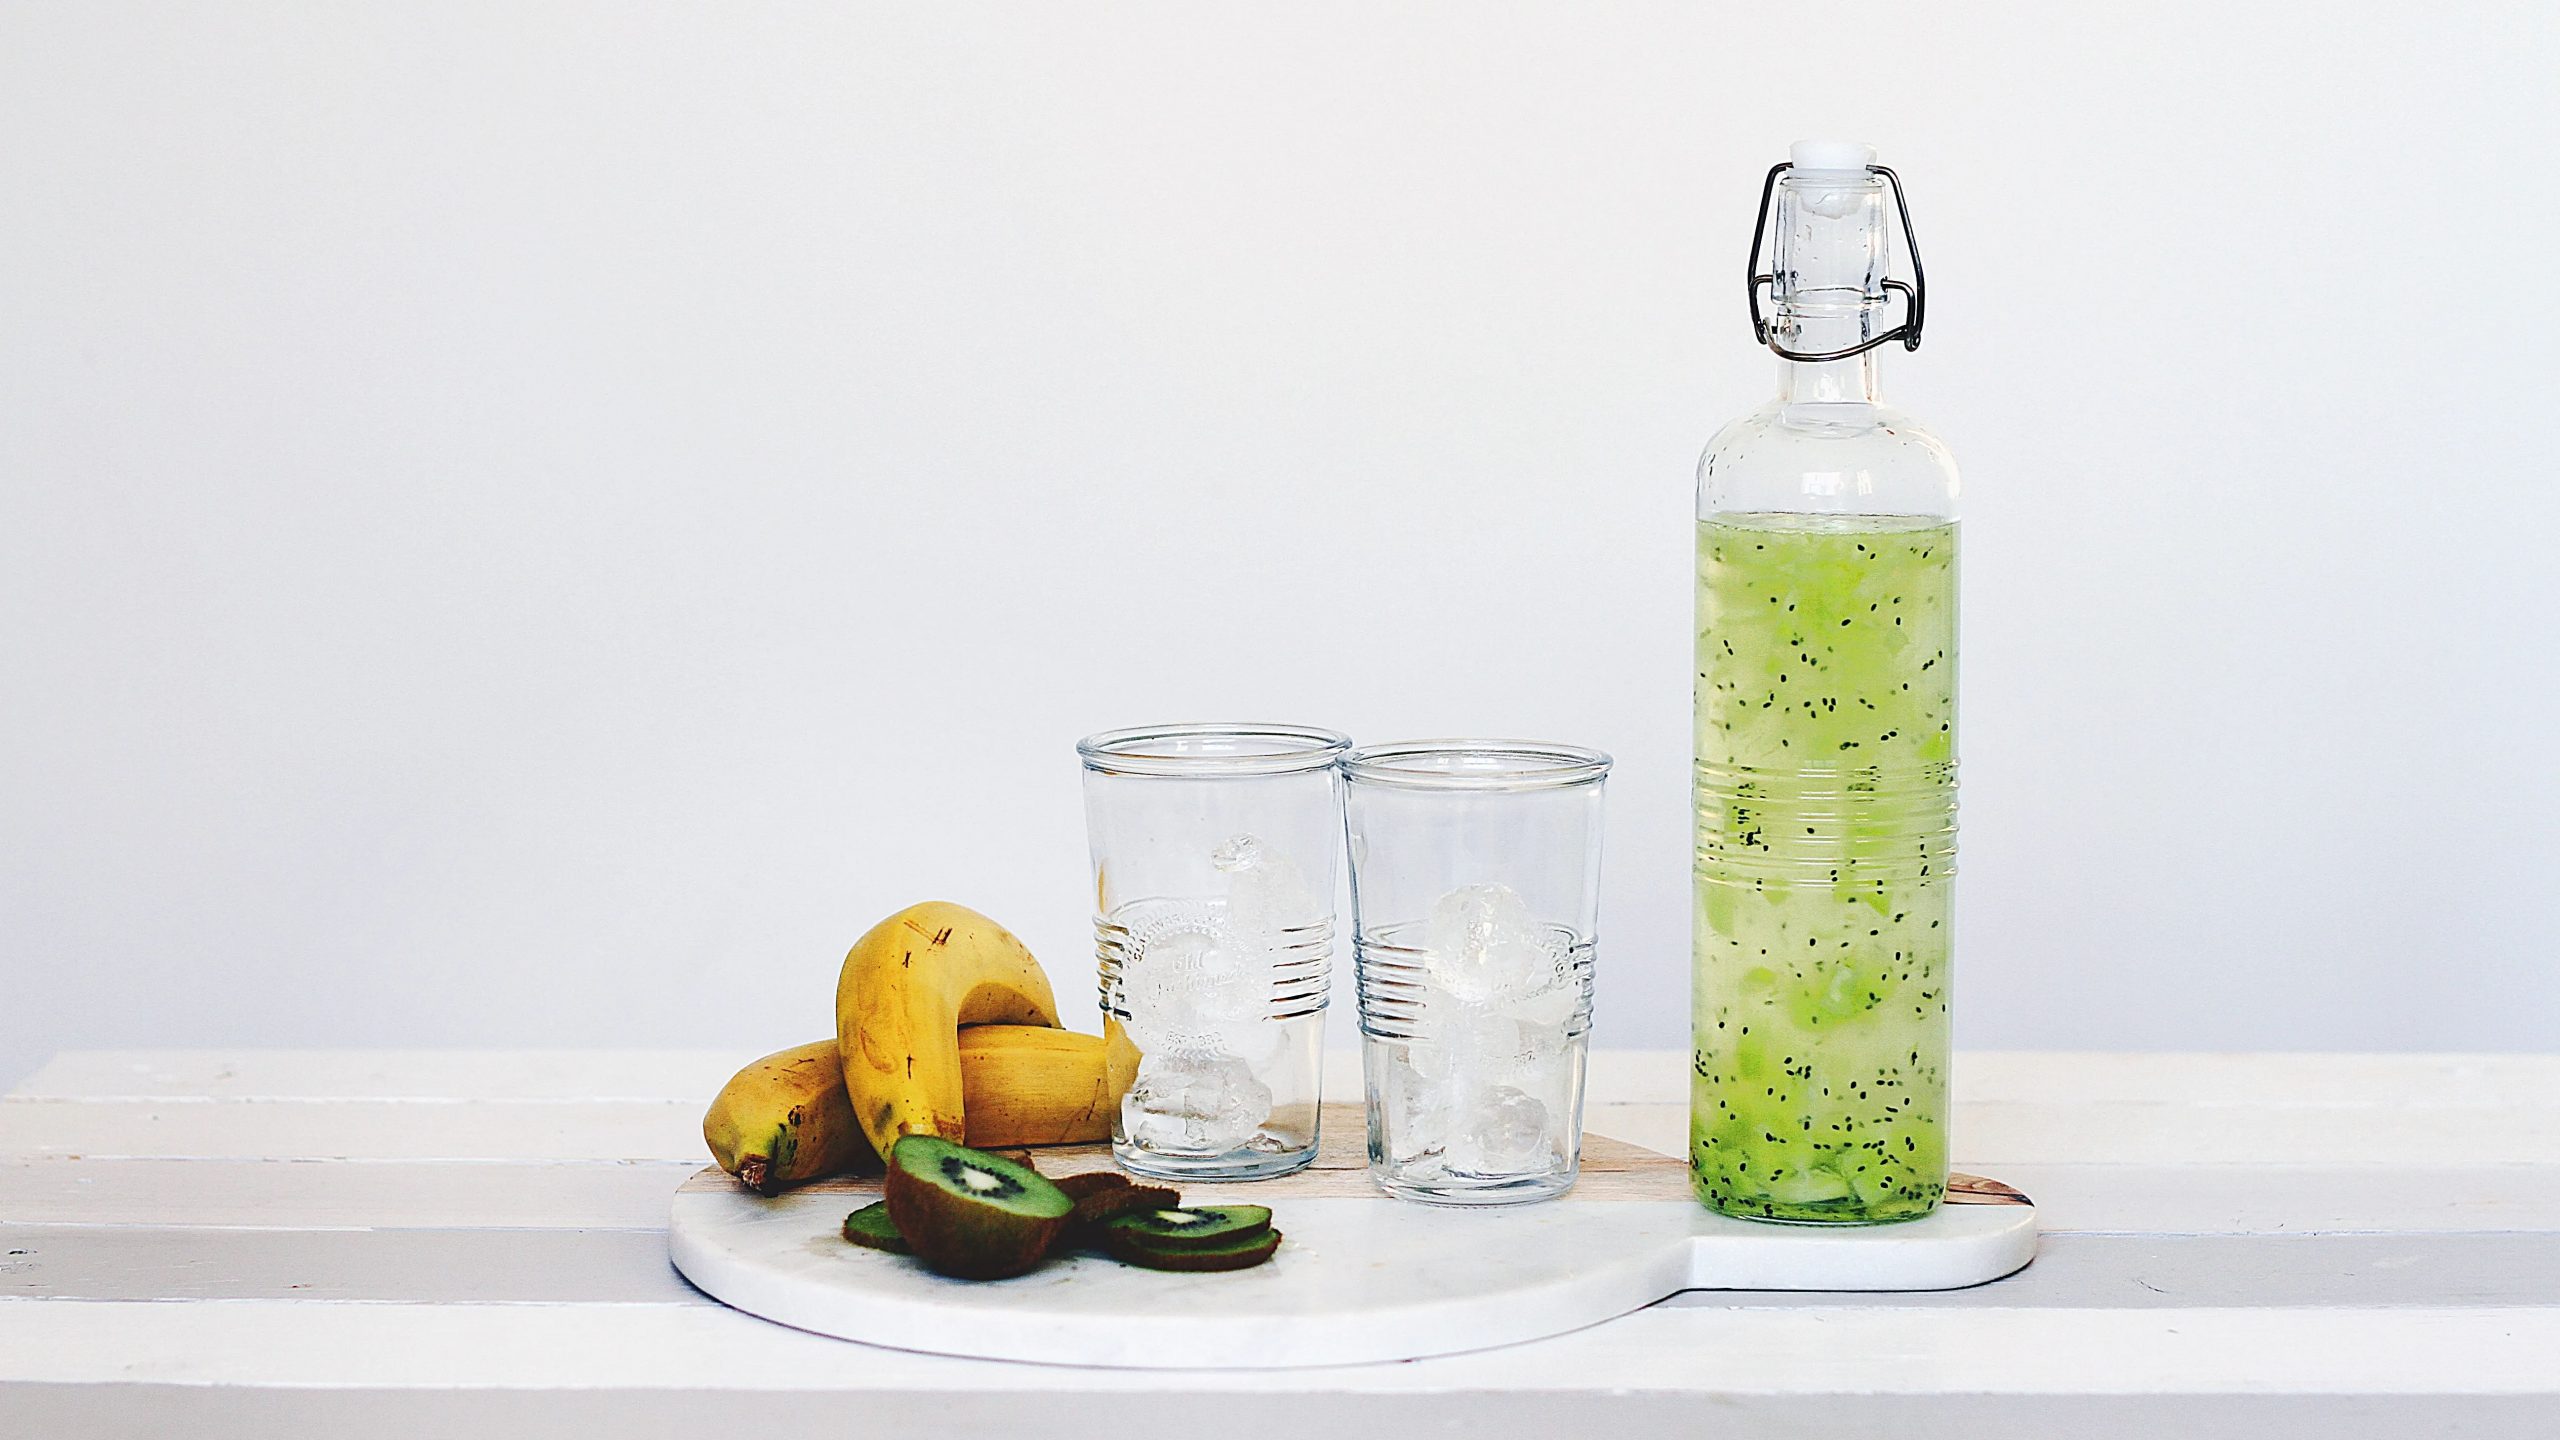 Feeling dehydrated? Try these fruit-infused water recipes